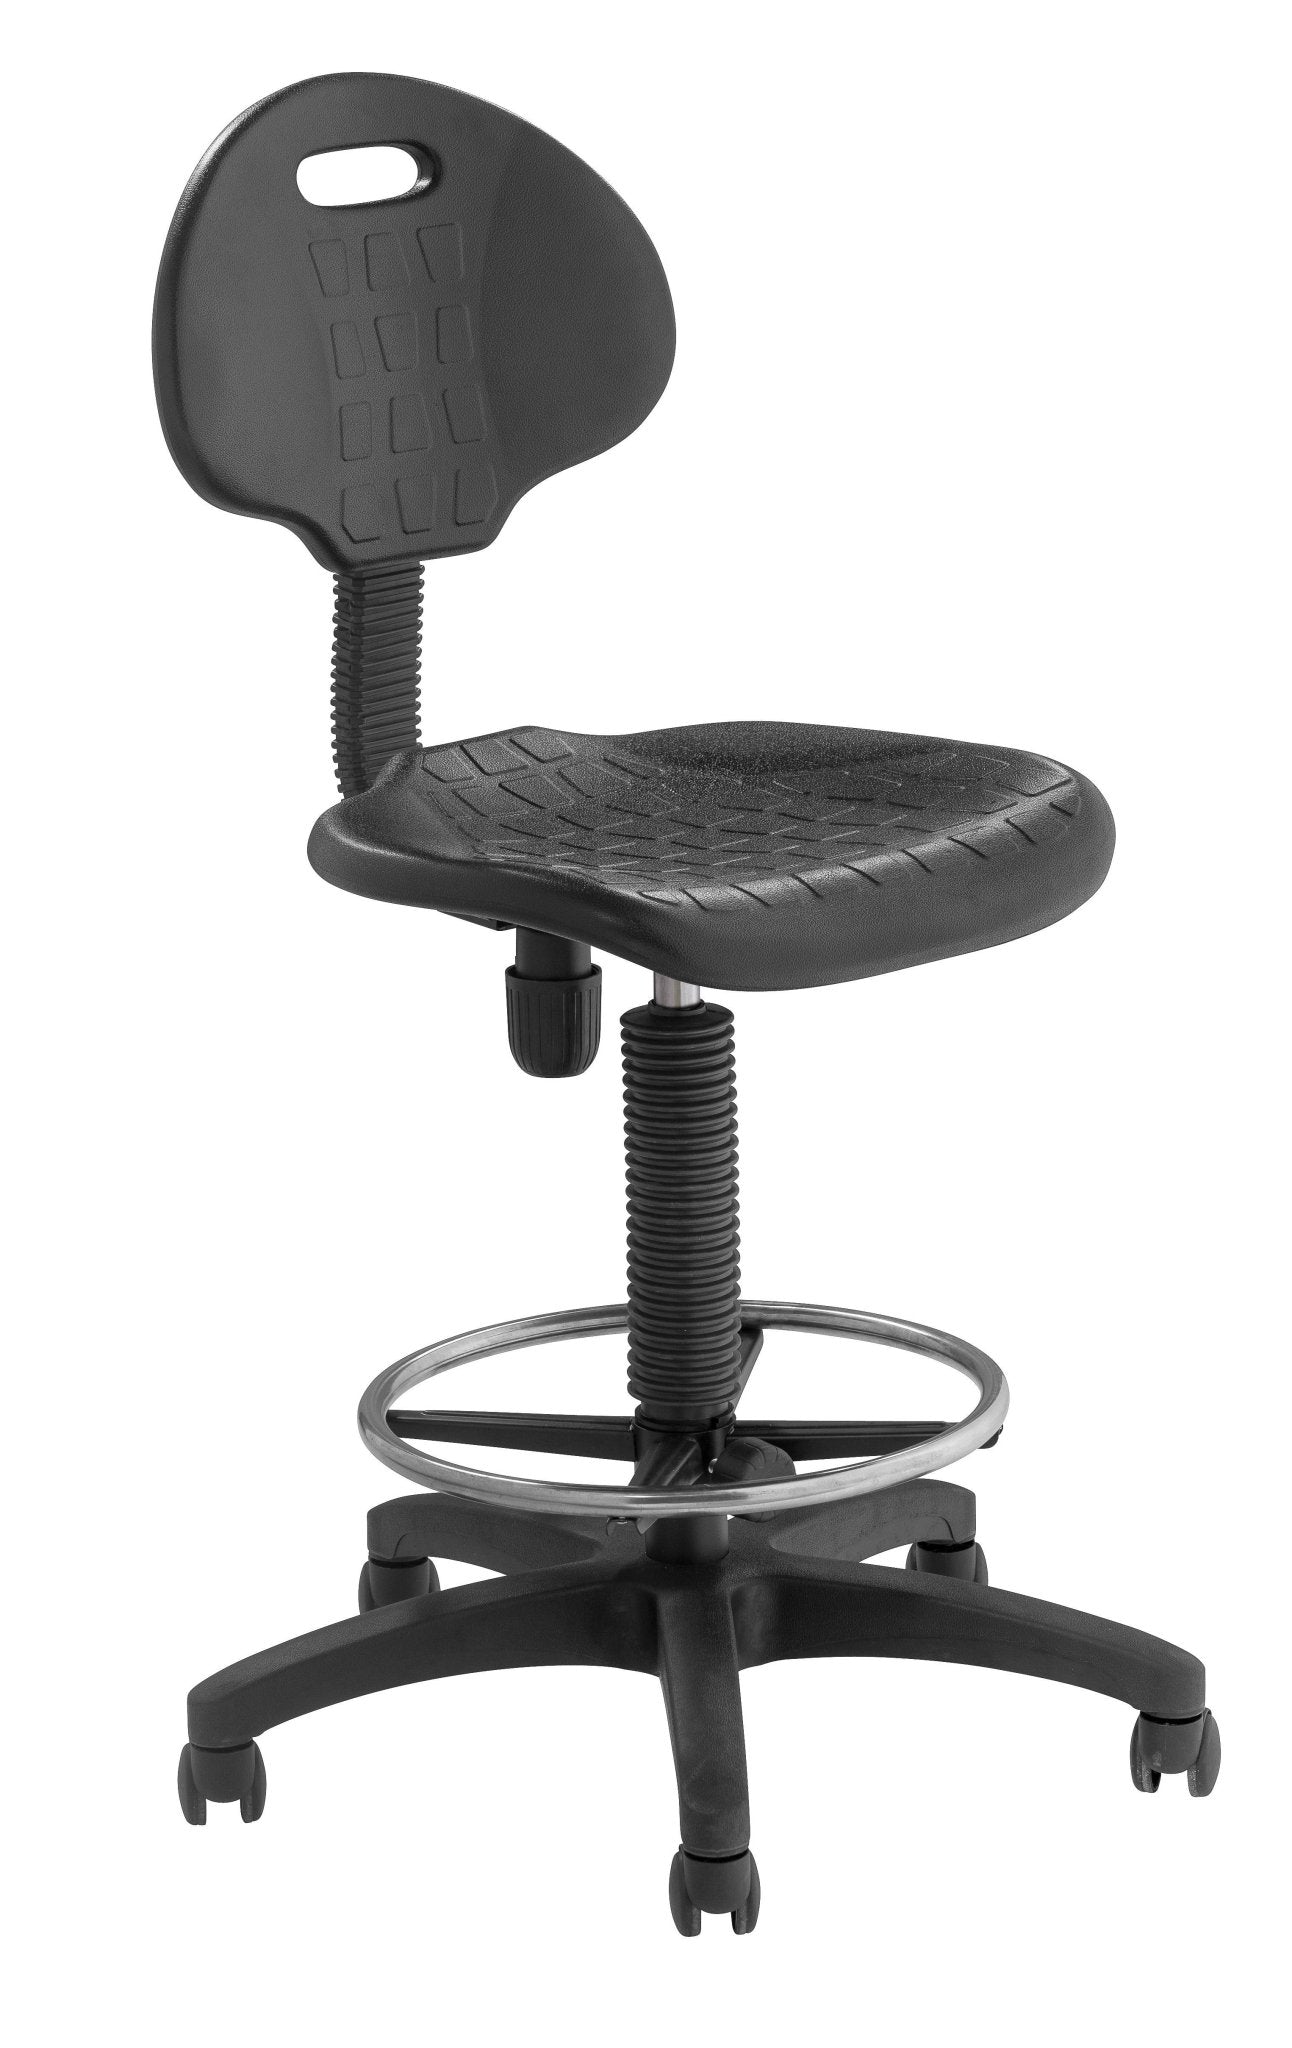 Lab and Science Shop Stool Polyurethane Seat and Backrest adjusts 22" - 32" H - for Offices, Classrooms, Science and STEM Labs (National Public Seating NPS-6722HB) - SchoolOutlet